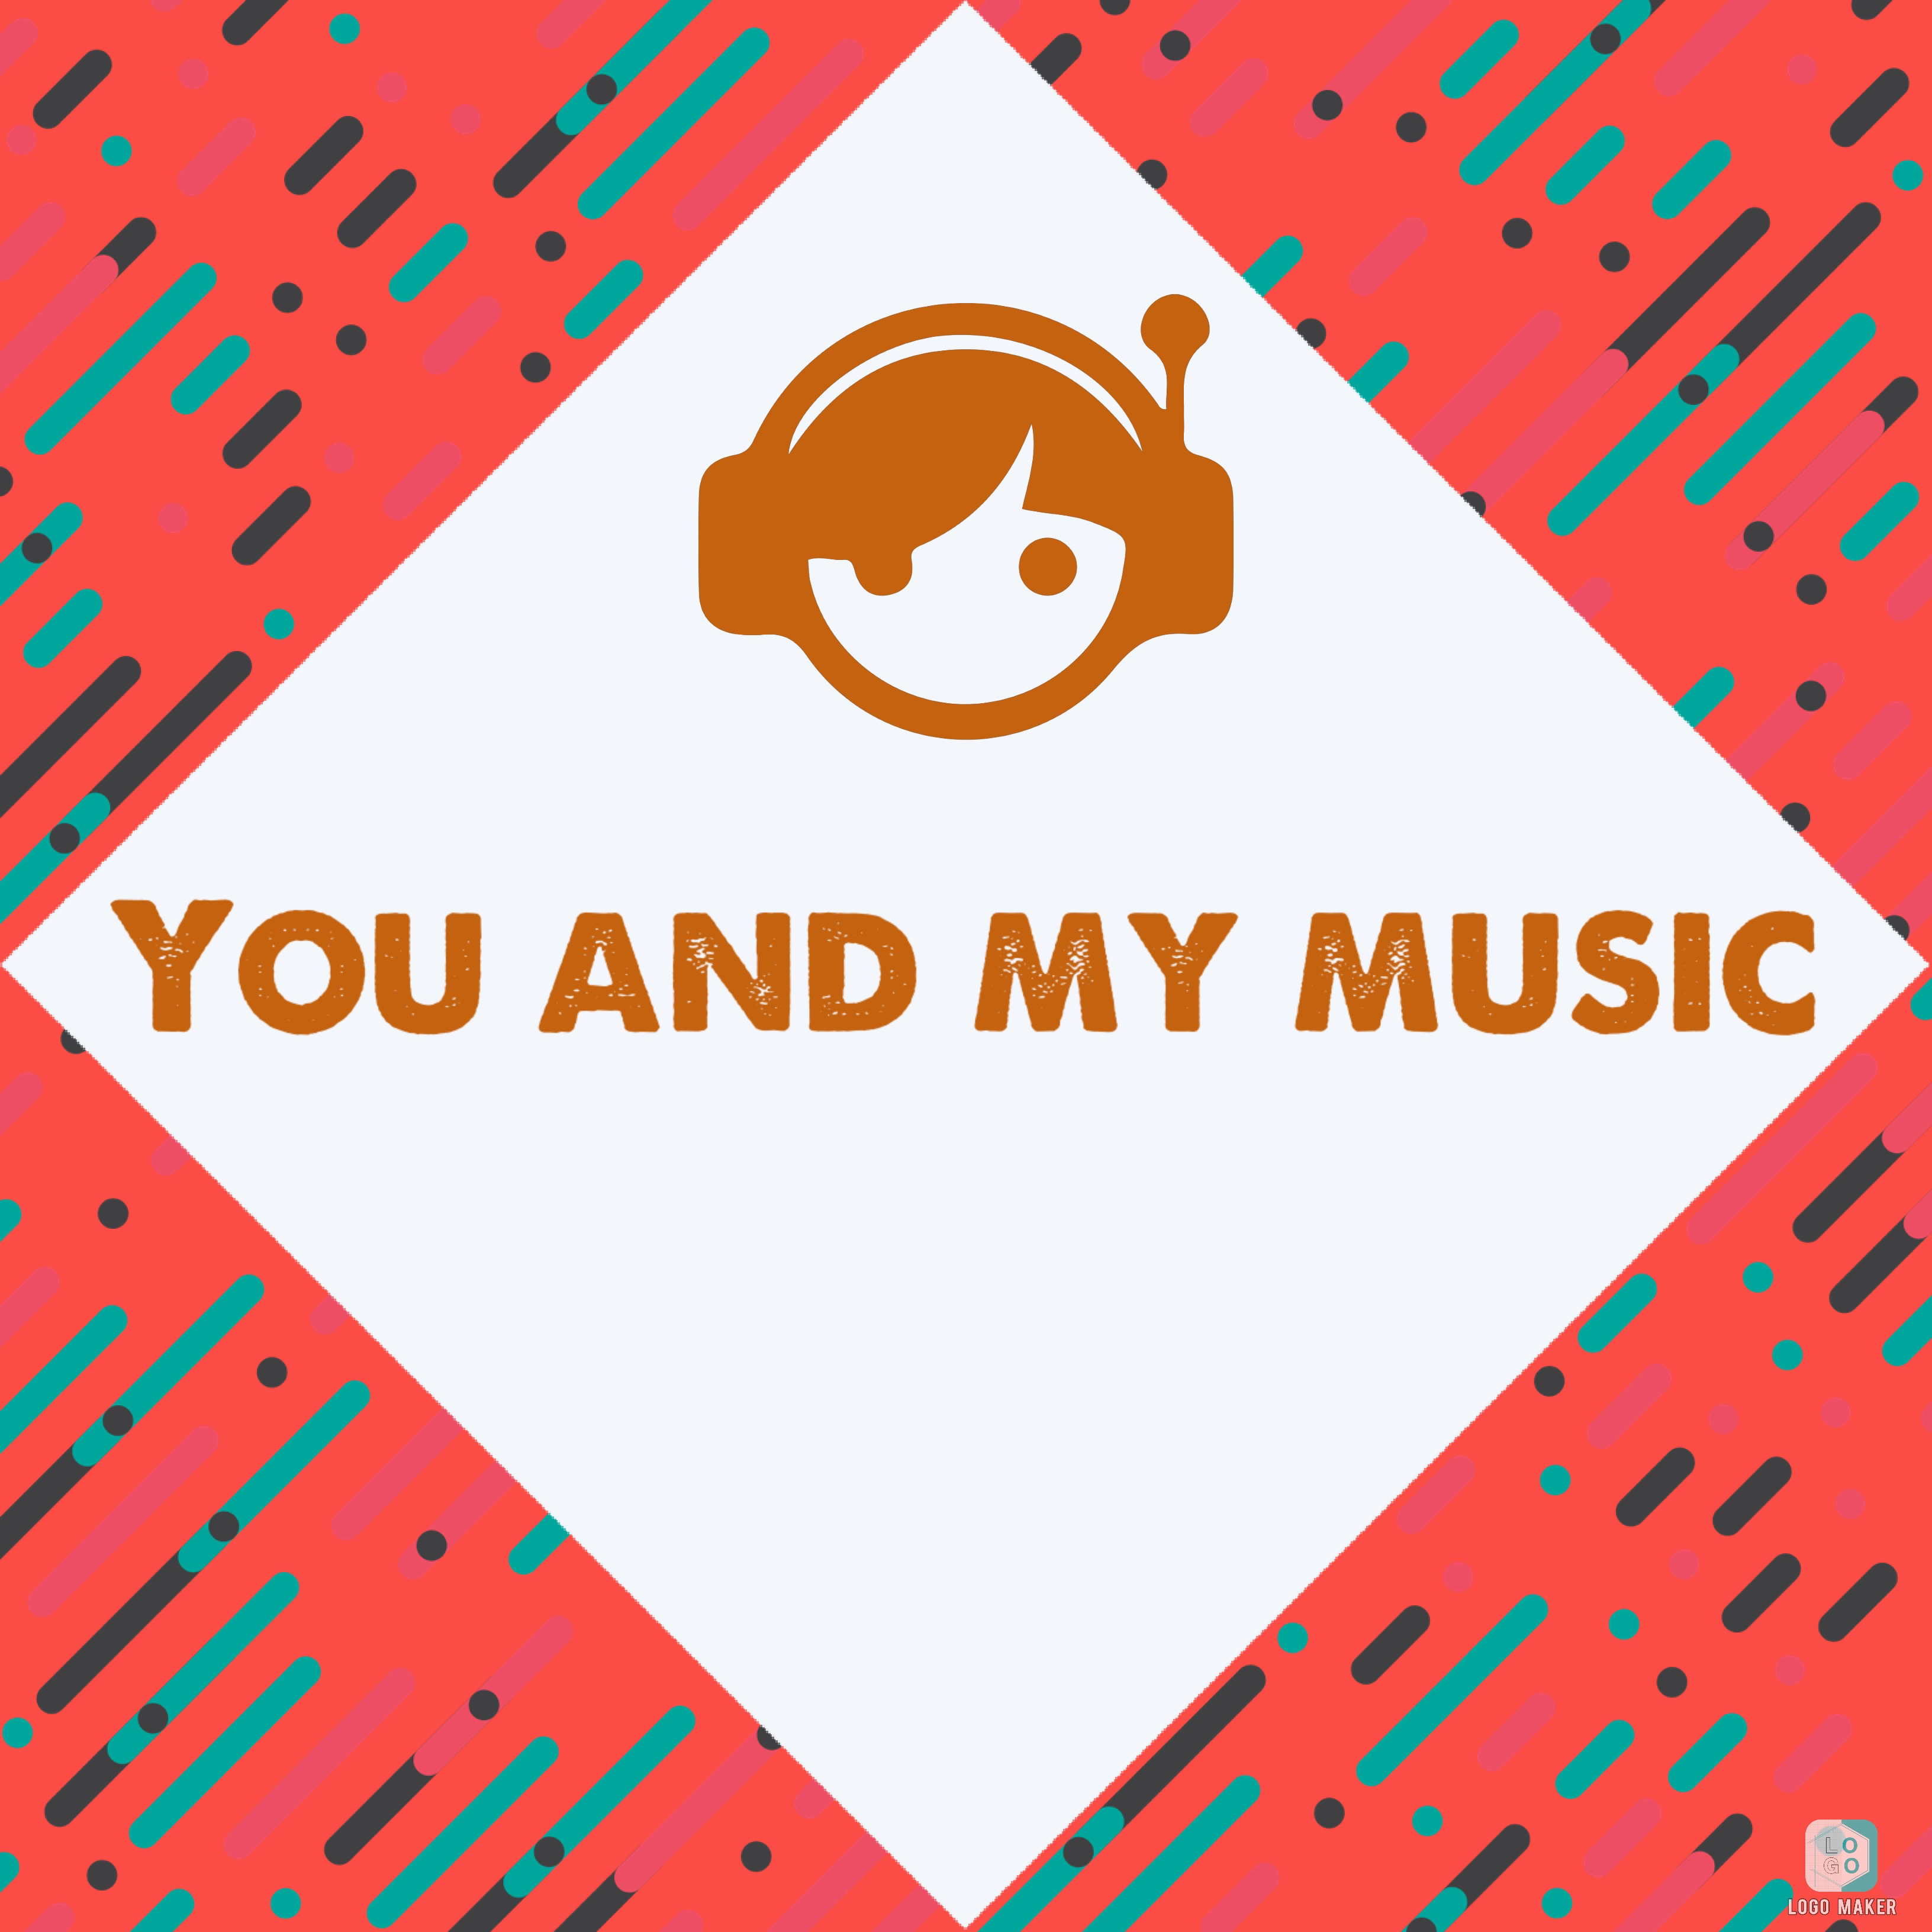 You and me music